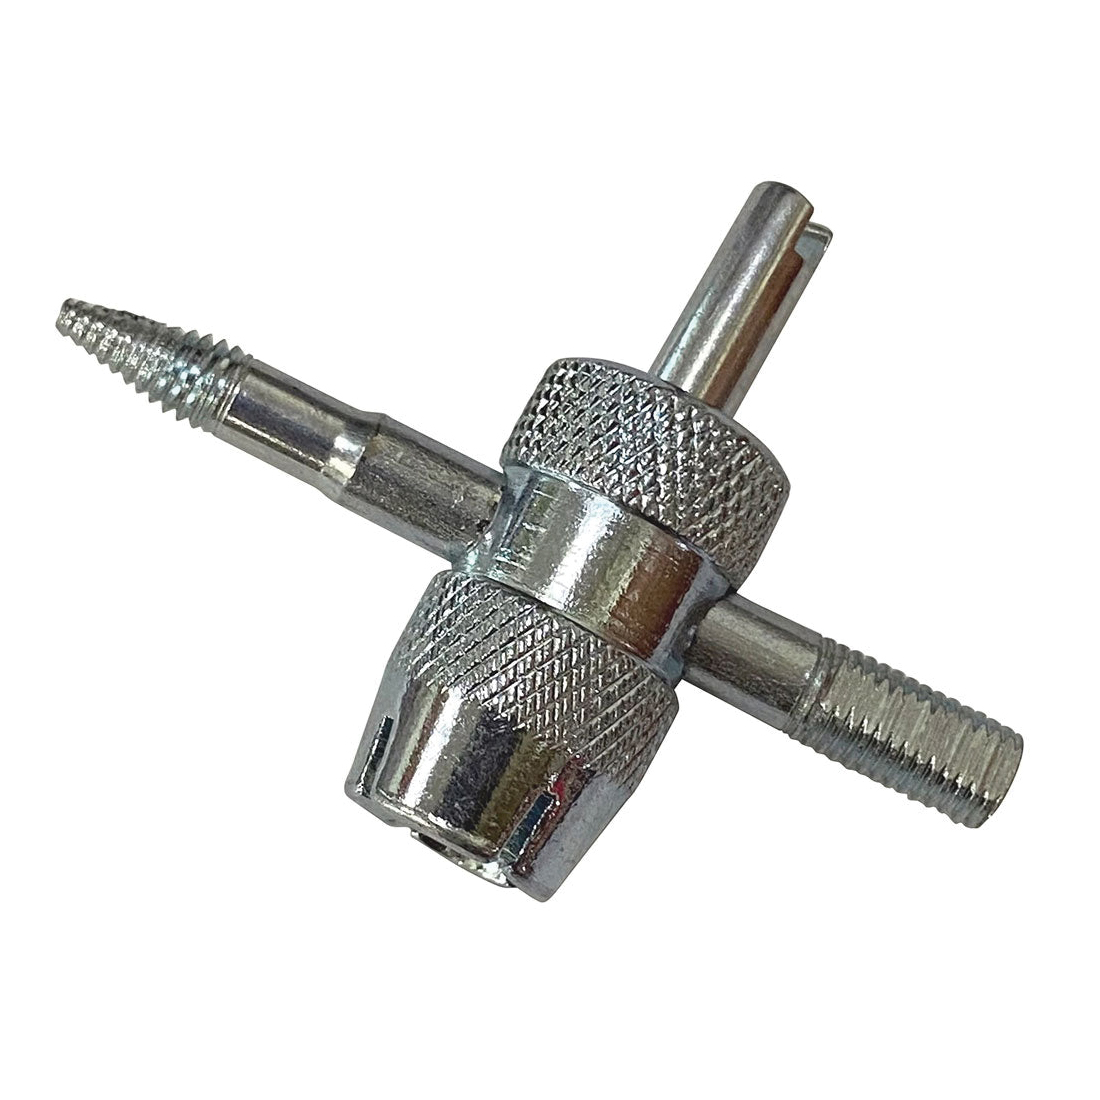 LOCKNLUBE® LockNFlate® LNL65201 4-Way Valve Core Tool, 1.9 in L, For Use With: Standard Schrader Valves